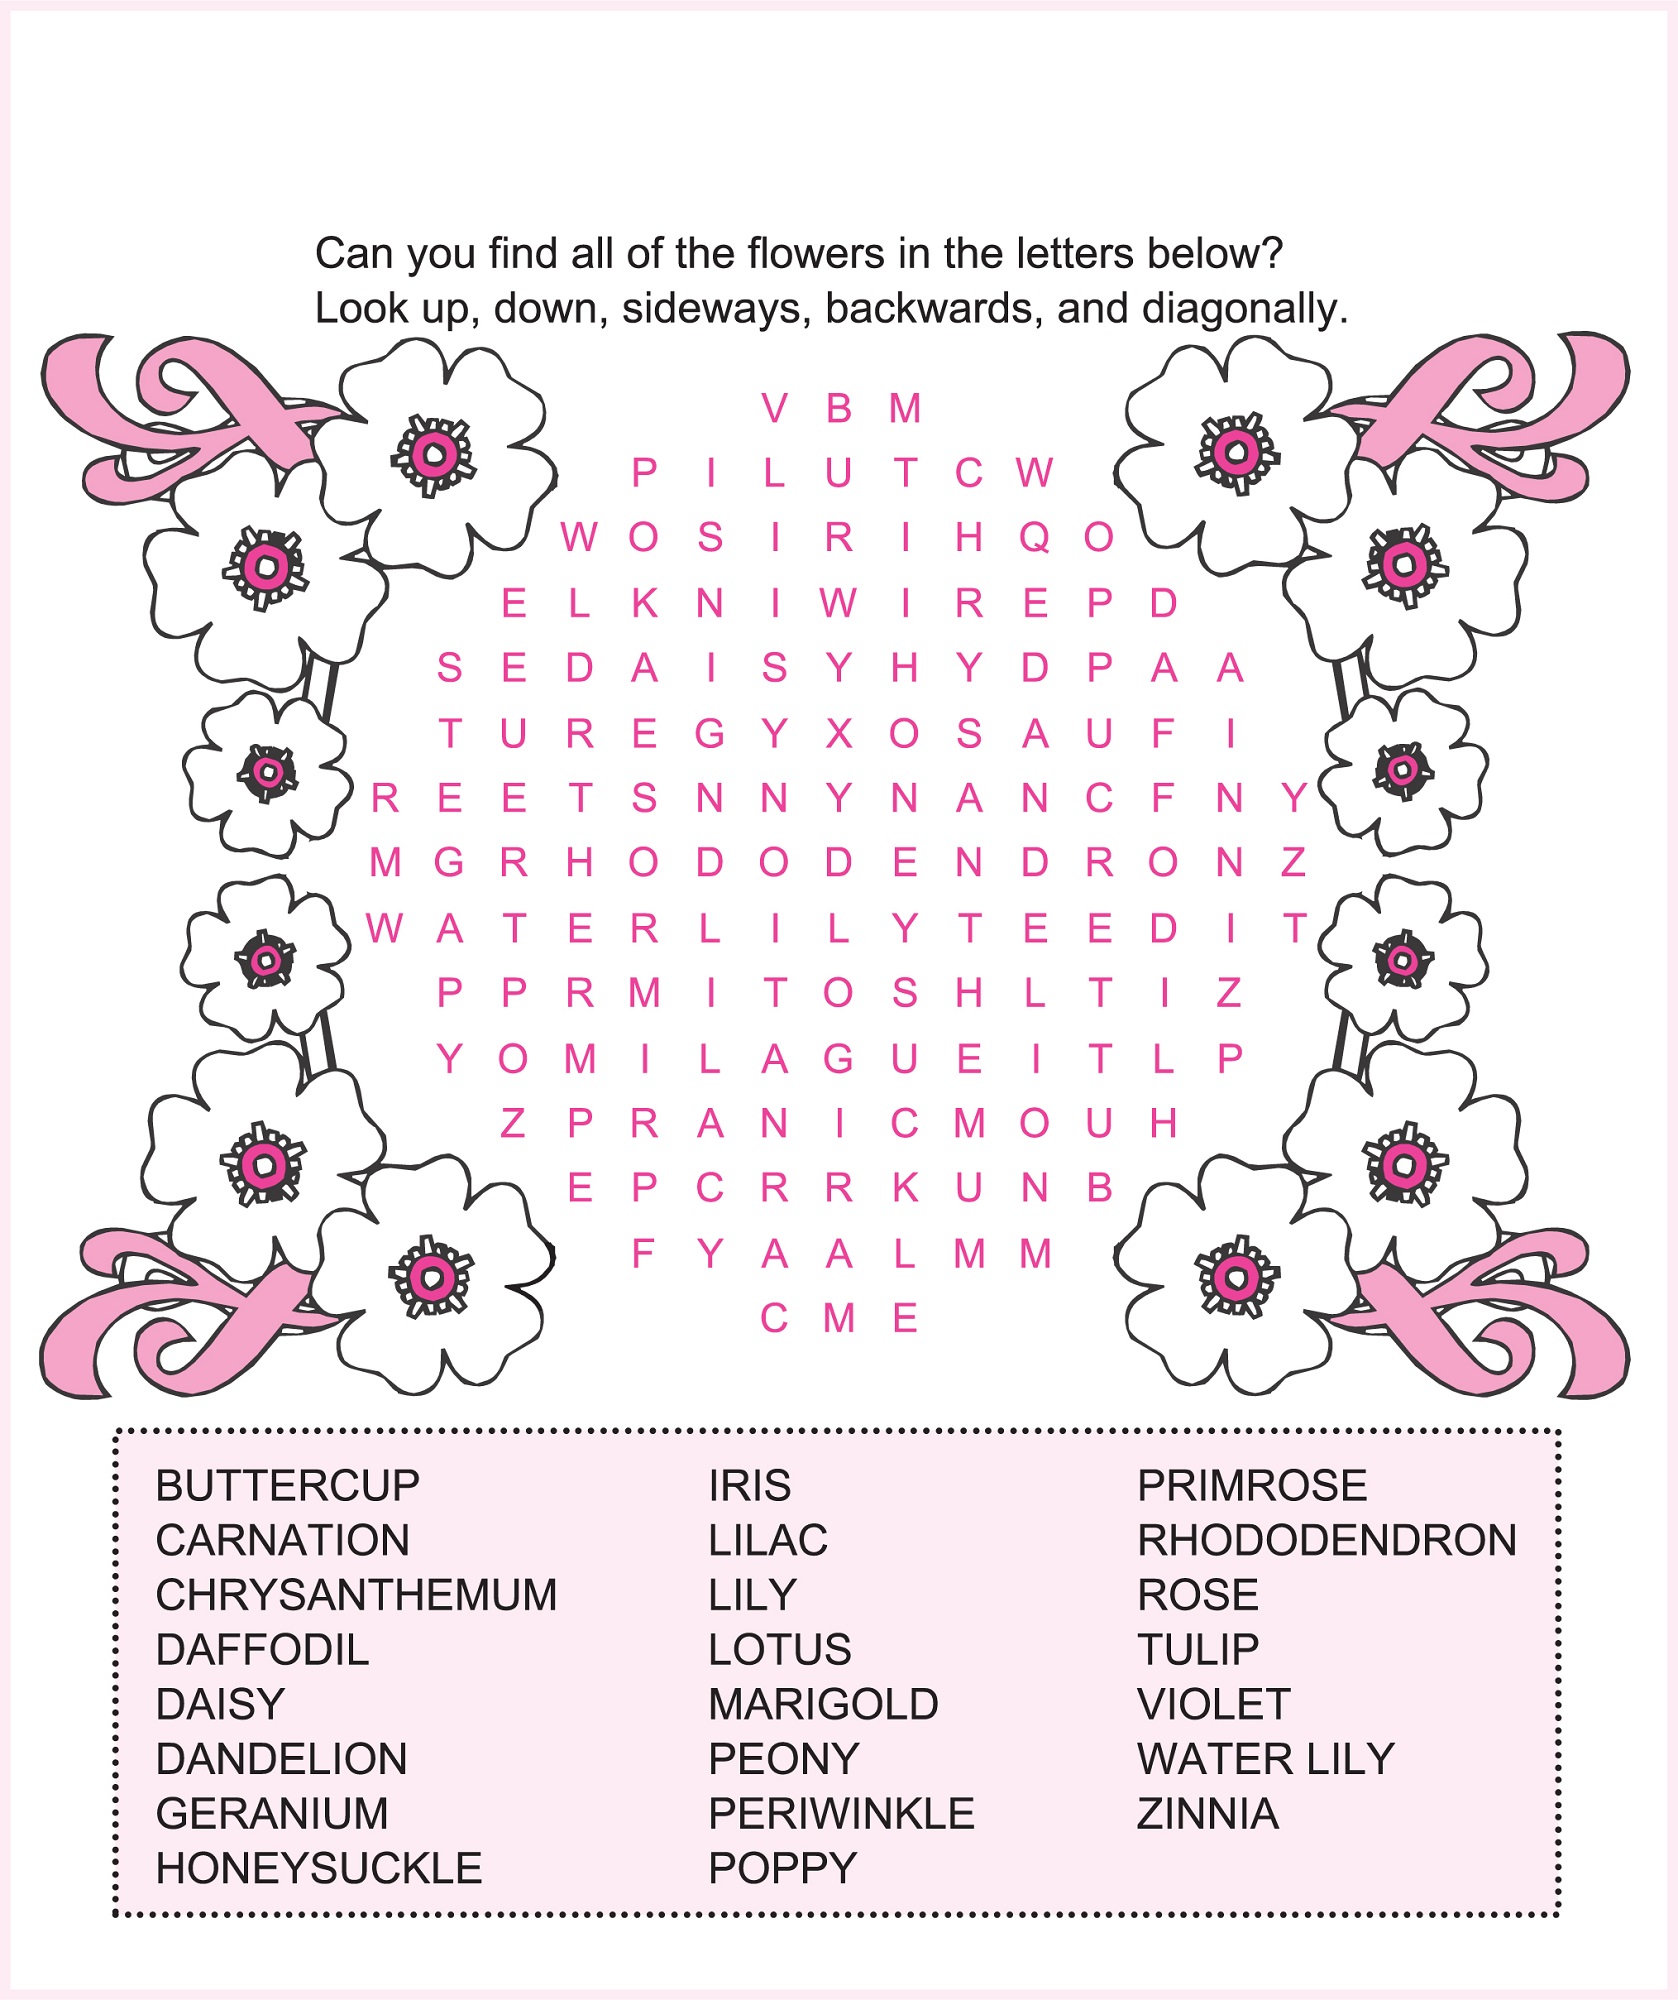 Word Search For Children Printable